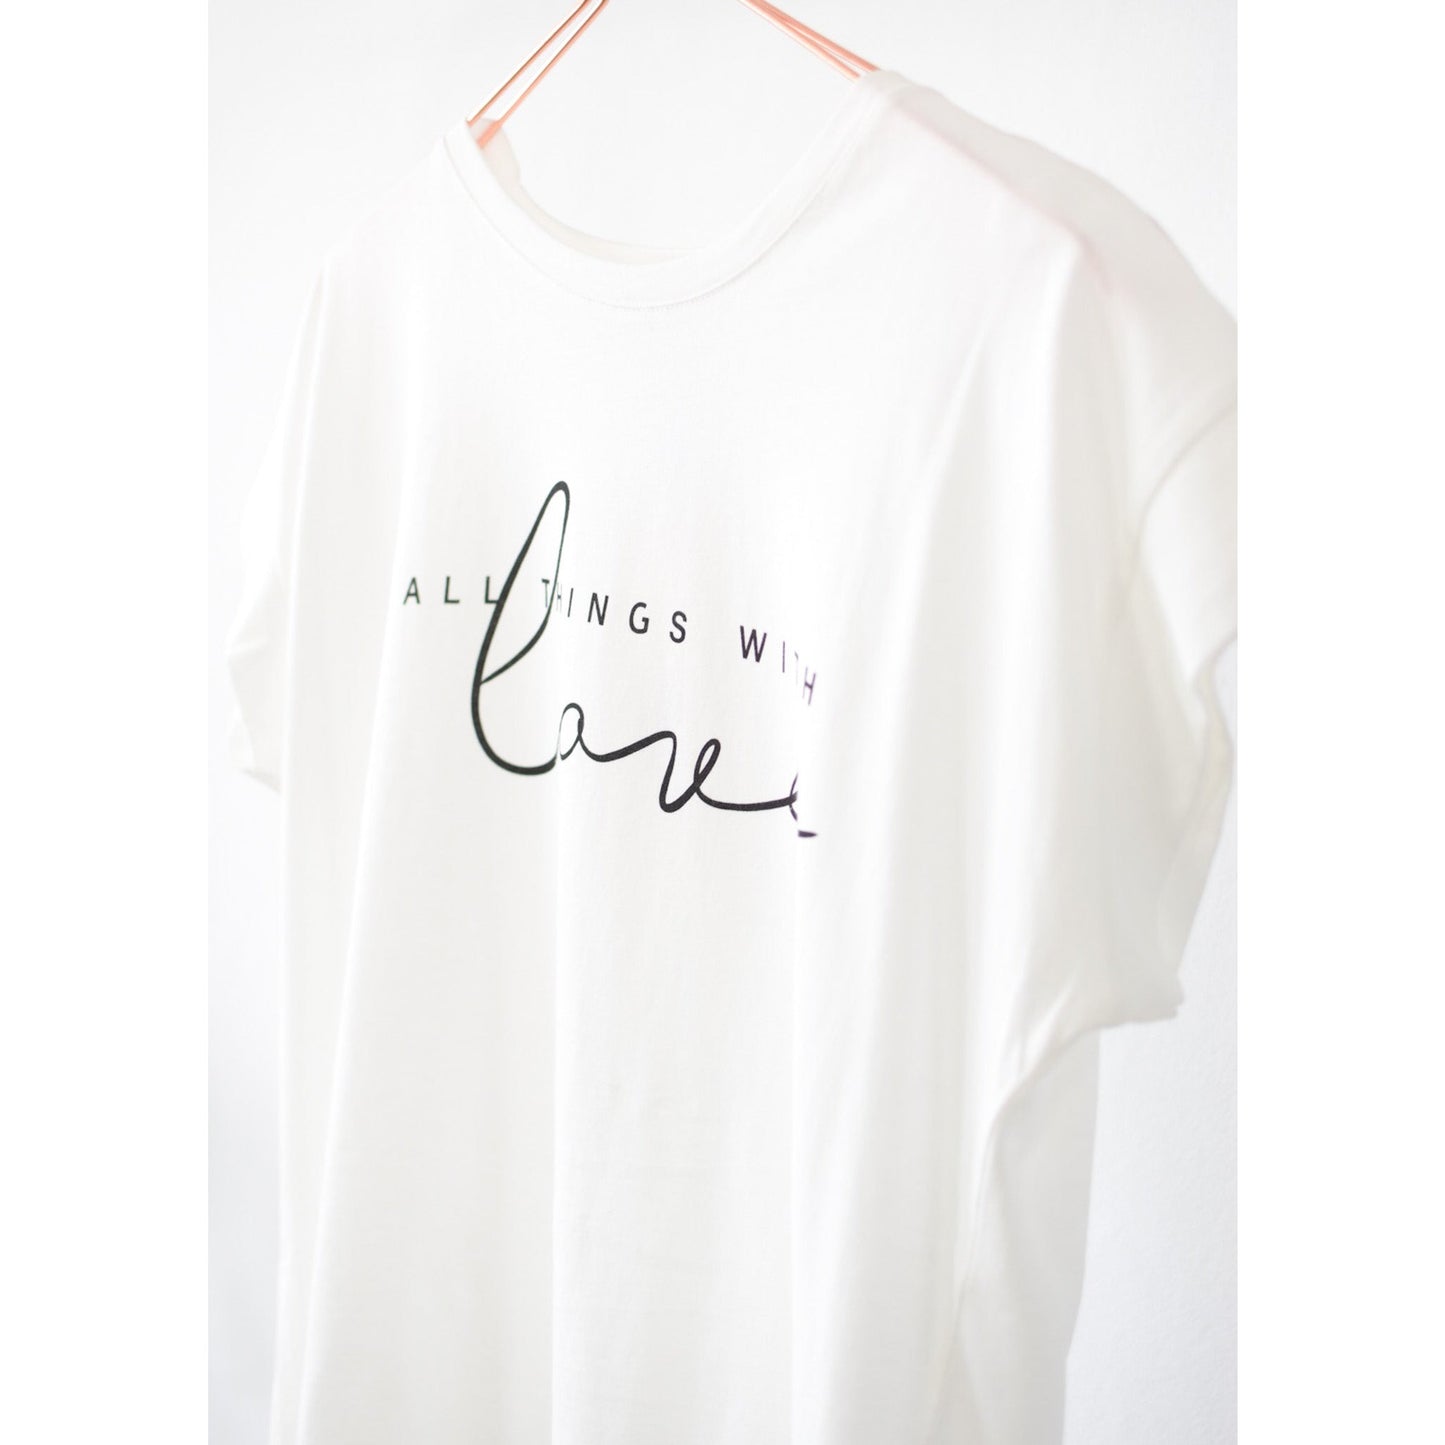 T- Shirt - do all things with LOVE -